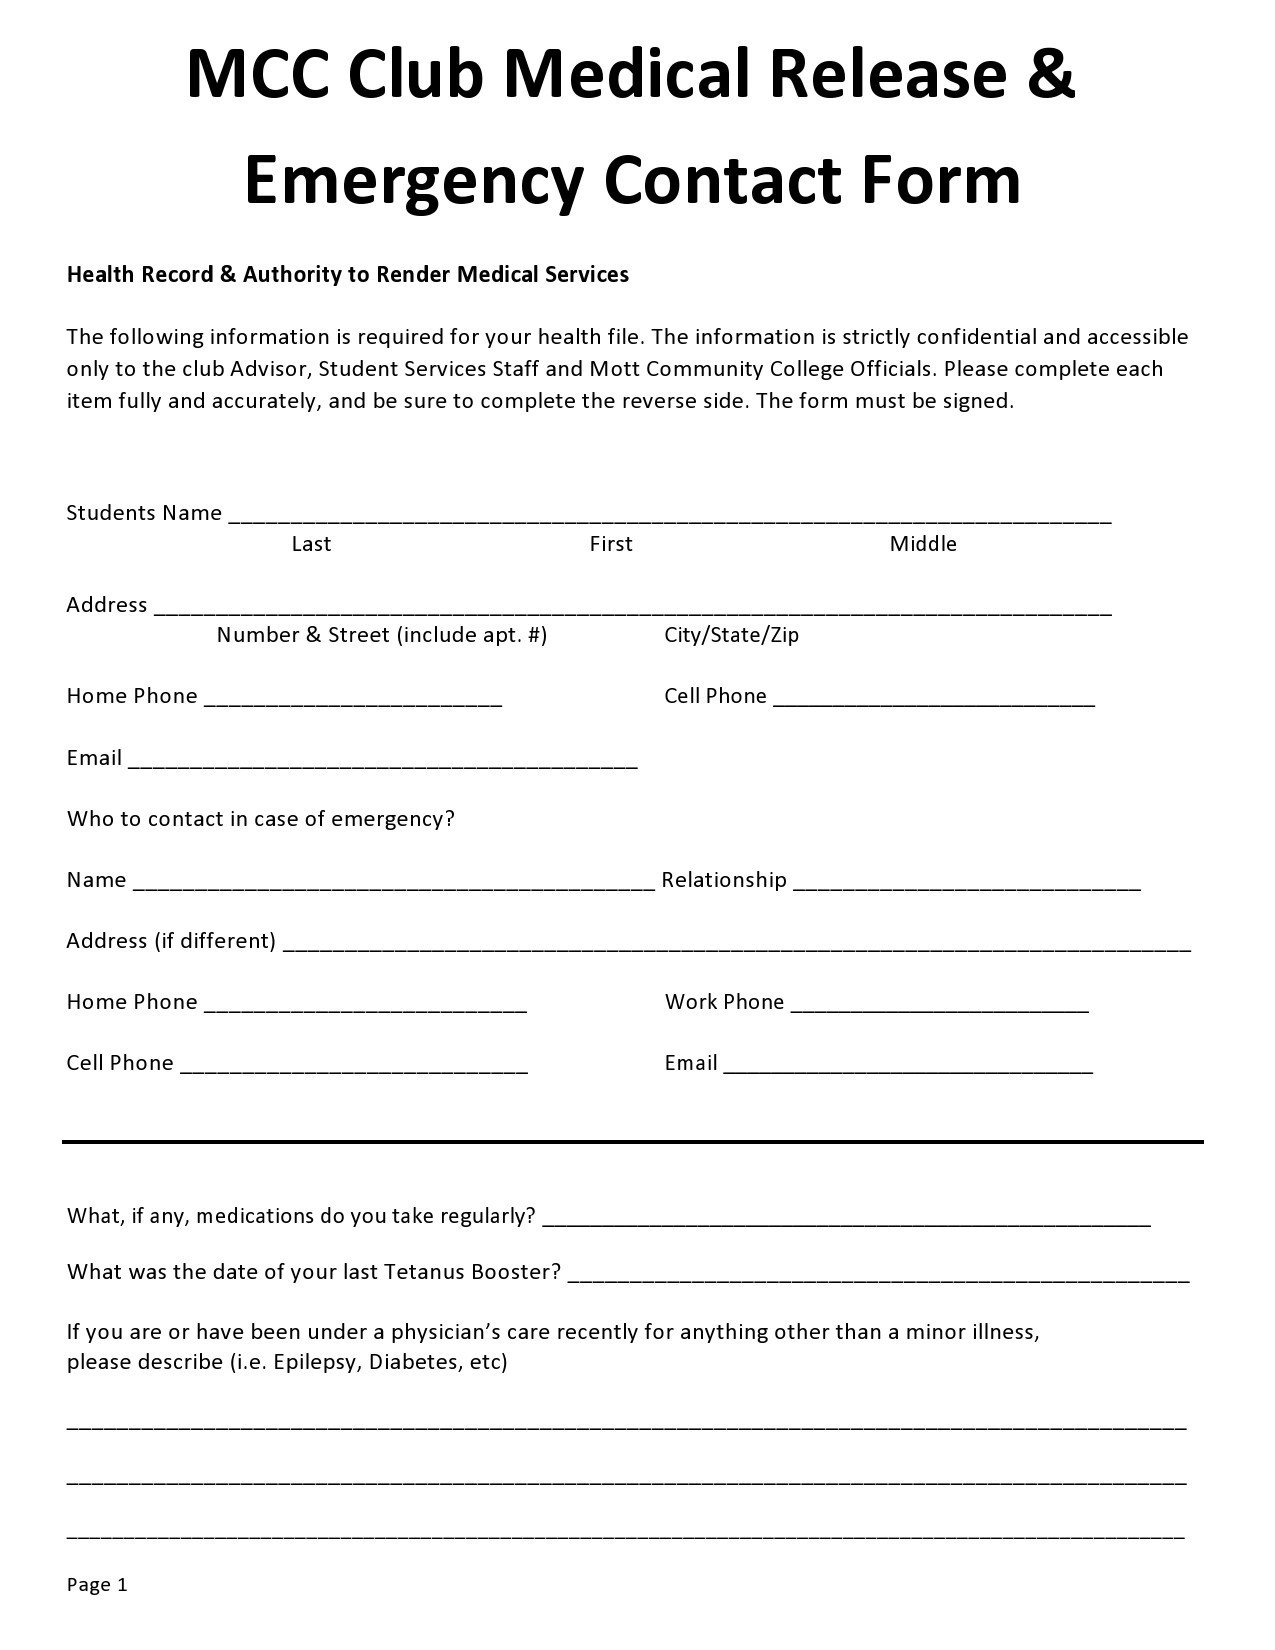 Free emergency contact form 32